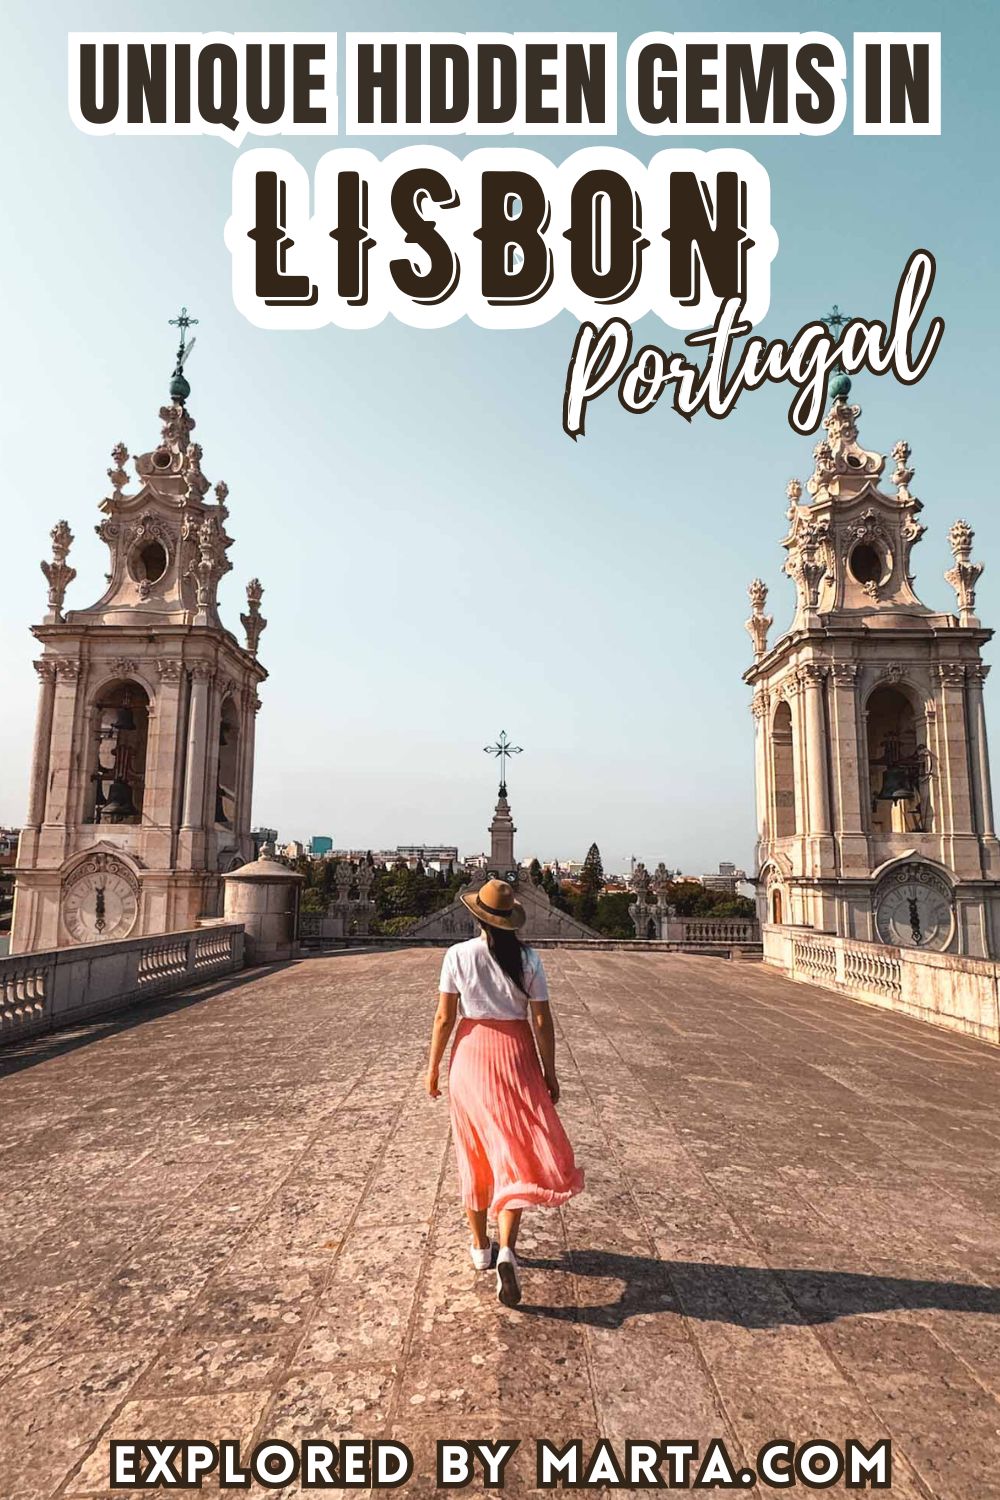 Secret spots and hidden gems in Lisbon, Portugal - cool places to include in your travel itinerary